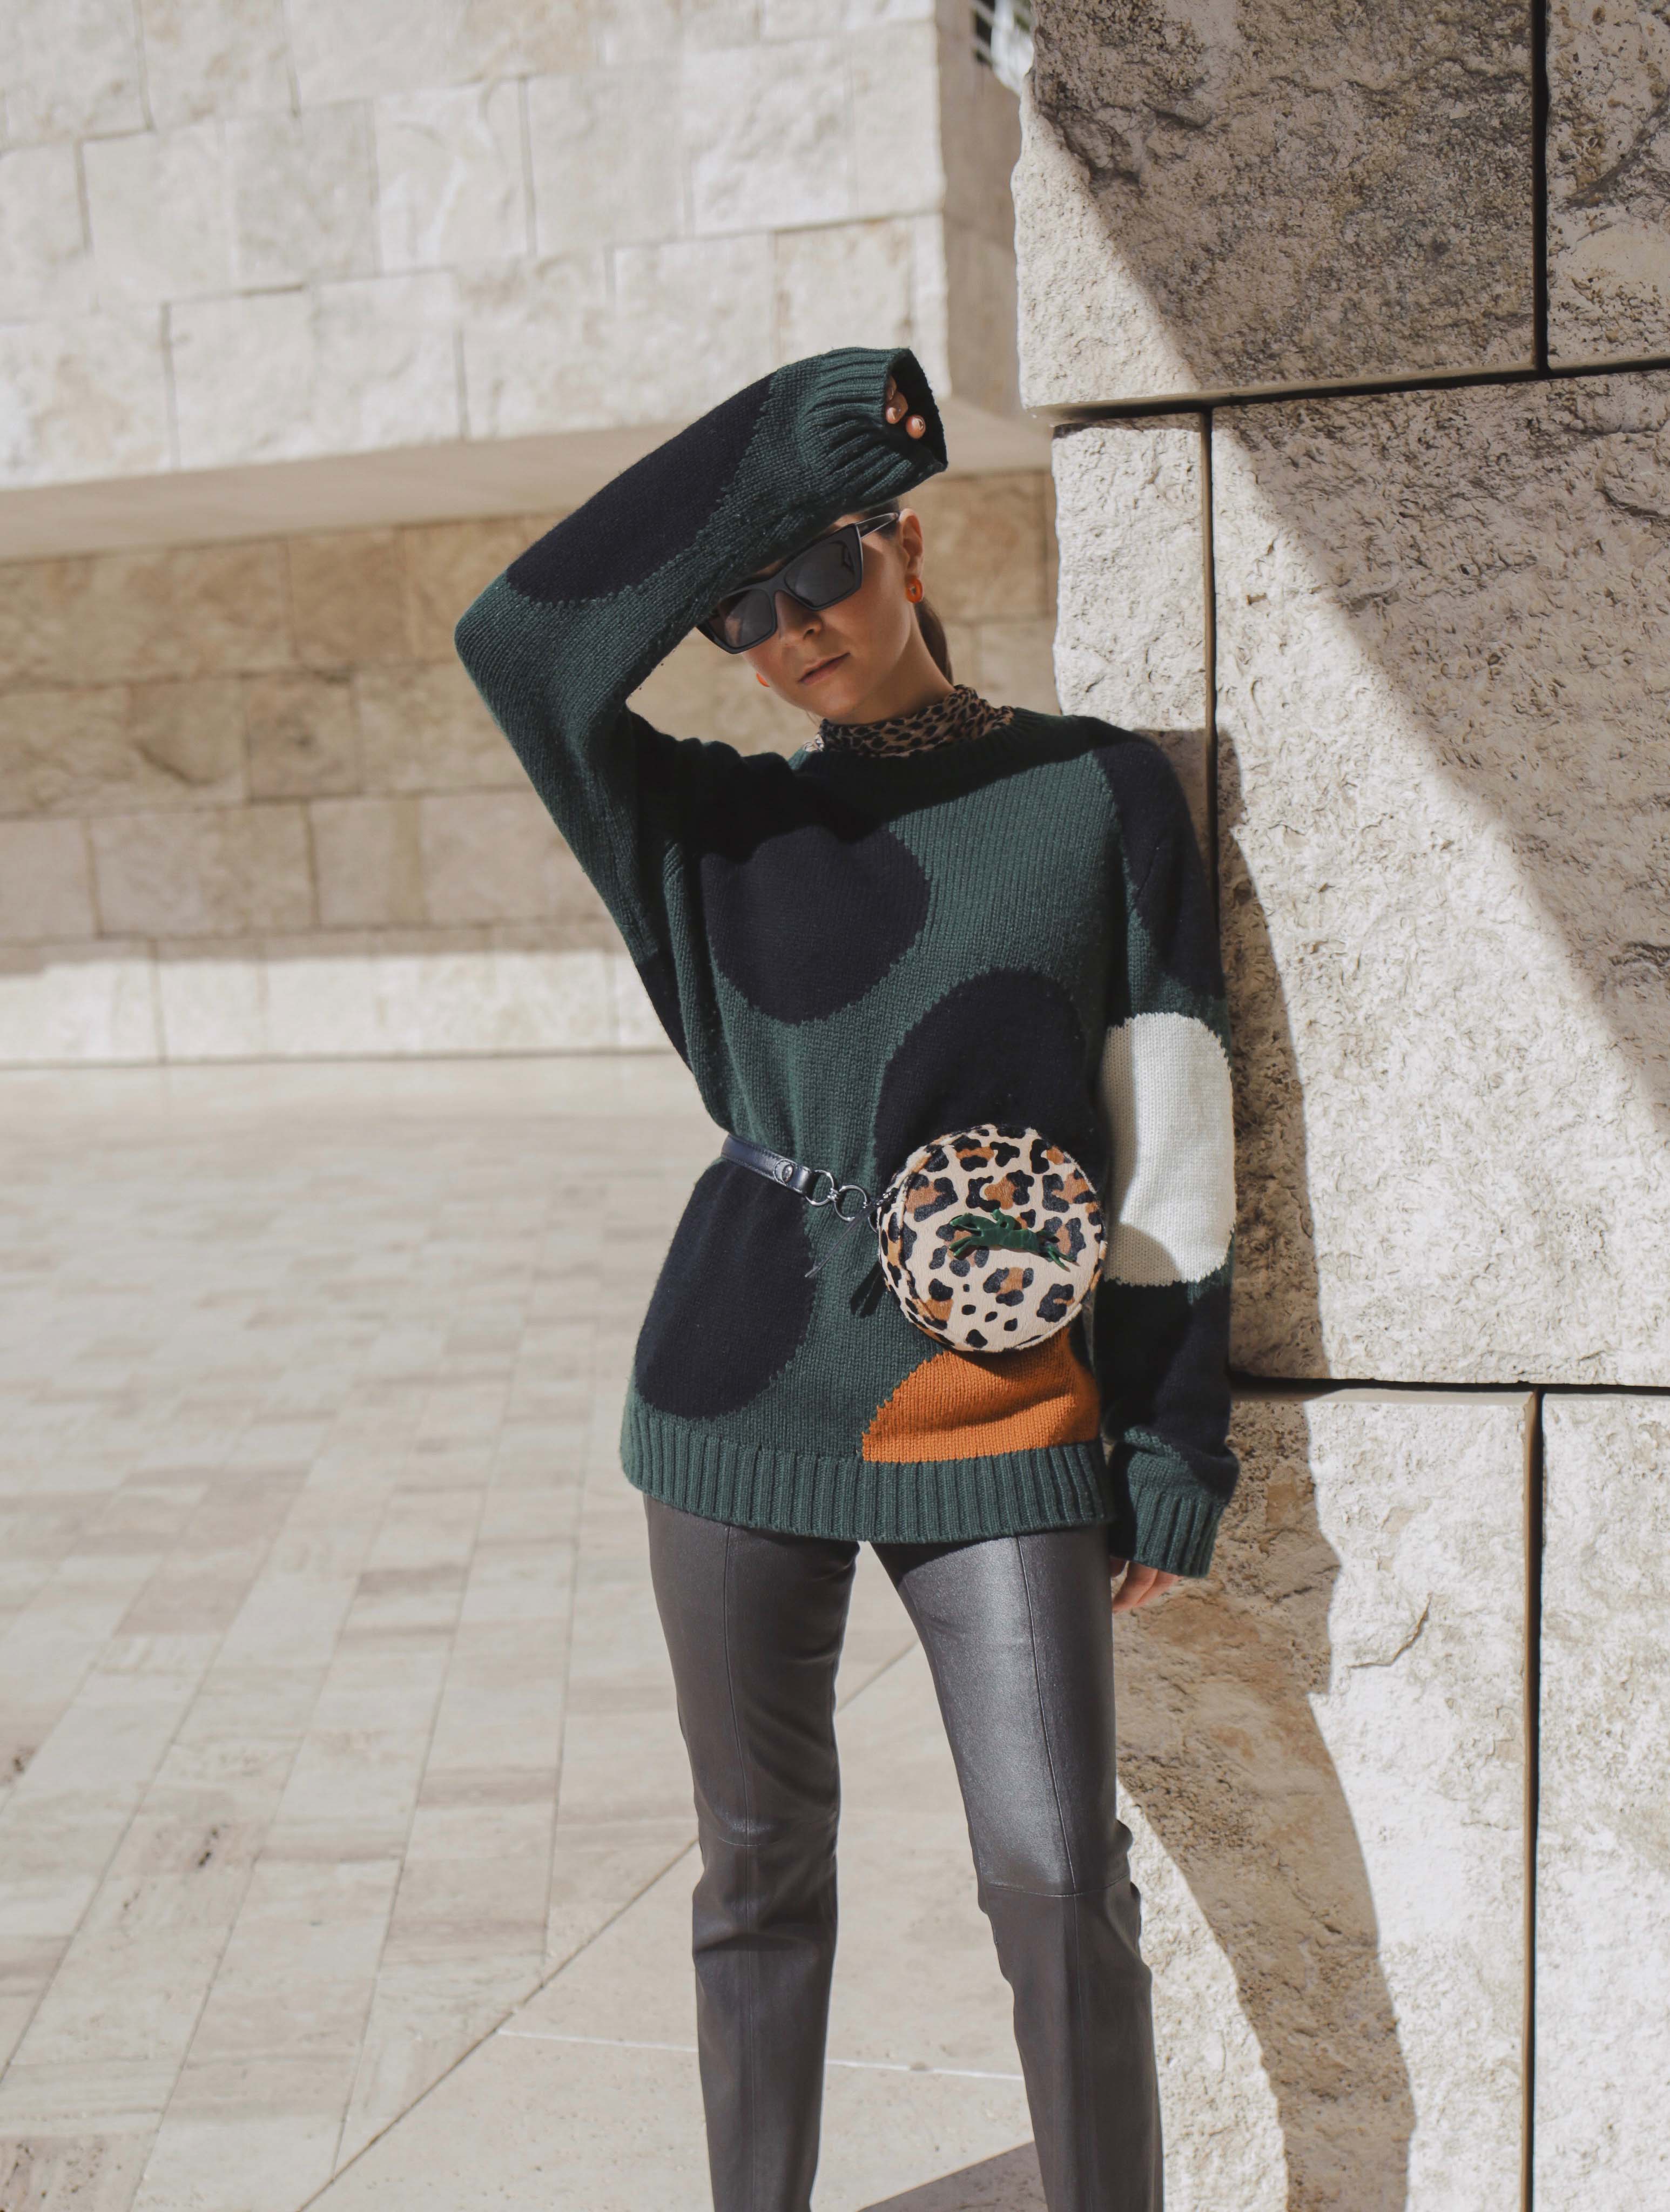 Winter style: arty swearter Chinti & Parker, Longchamp belt bag (similar here), Leopard turtleneck top Rag Doll LA, Equipment brown leather pants, Glass hoops Wolf Circus, AGL leopard ankle boots, Jeanne Shoulder Bag in brown by Yuul Yie. Getty center, fashion photography, fashion editorial, fashion photoshoot